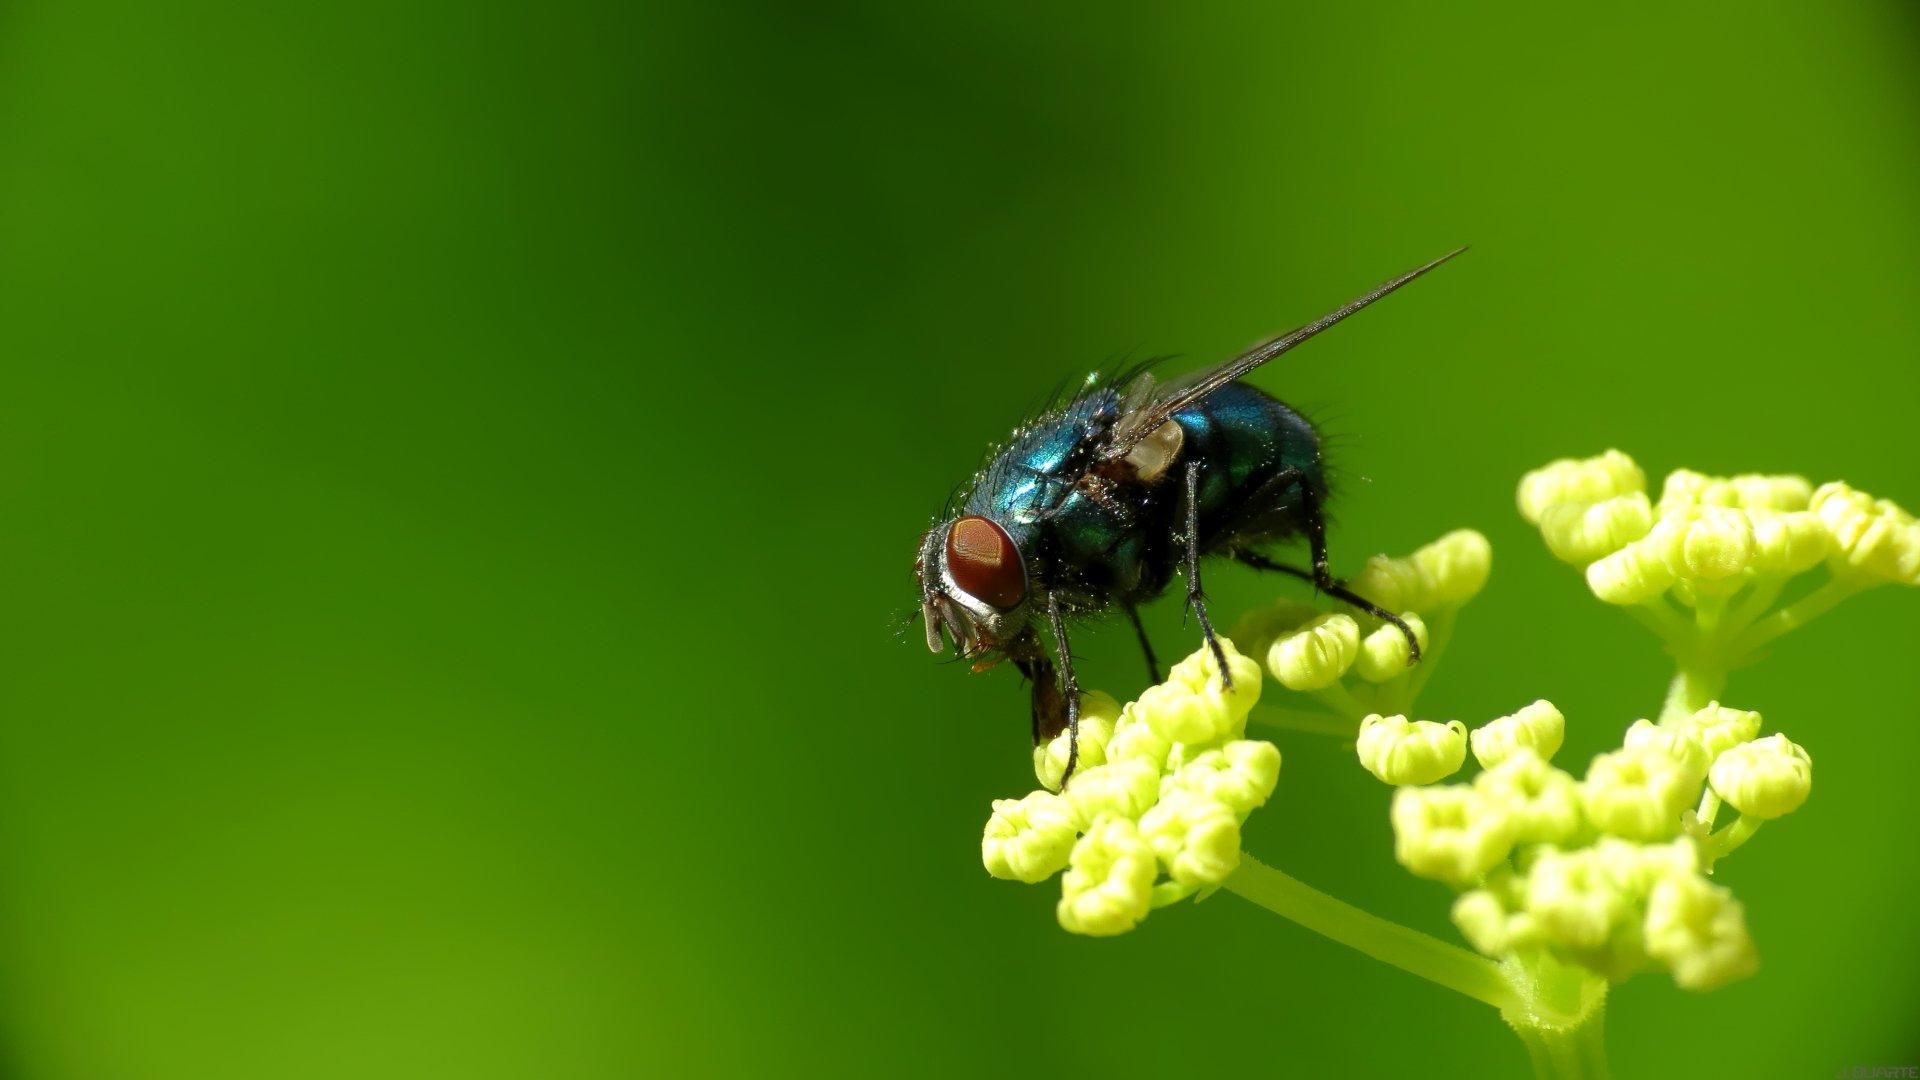 268489 fly, Samsung Galaxy A51 5G wallpaper download, 1080x2400 - Rare  Gallery HD Wallpapers